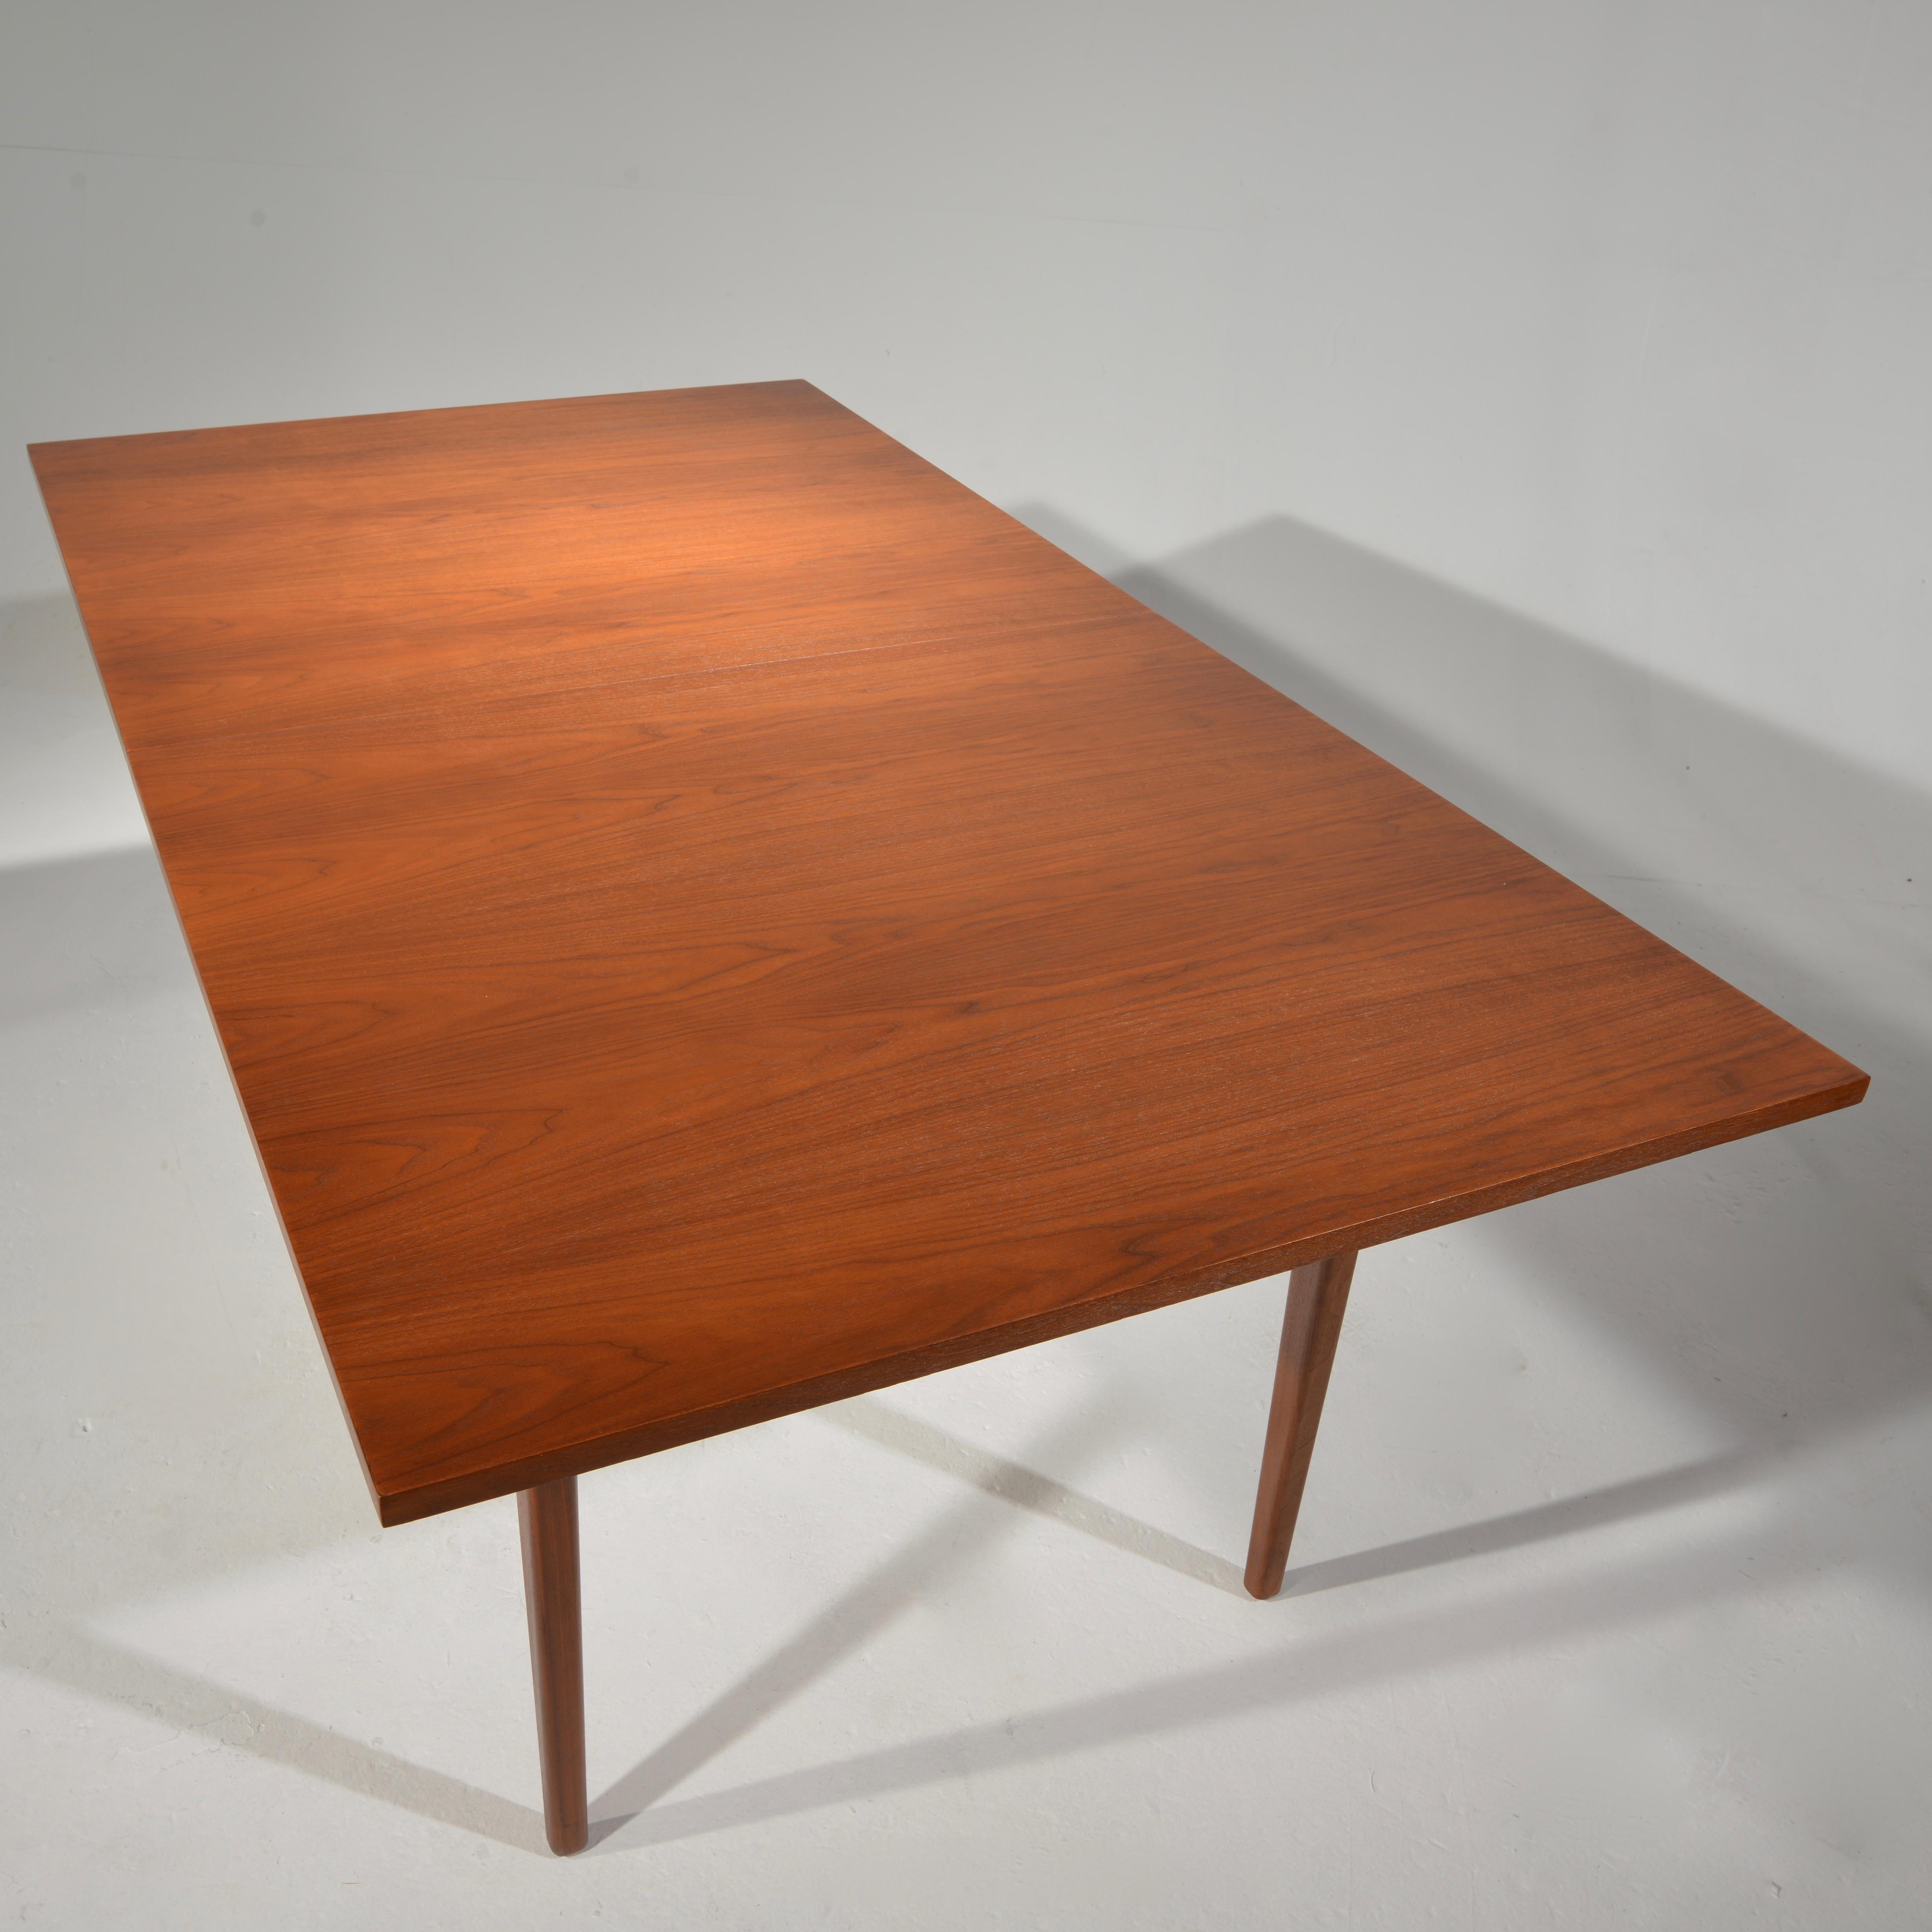 This is an extremely rare and beautiful dining table by George Nelson for Herman Miller. Fully restored and in excellent condition. There are two self-storing leaves which are concealed inside/ under the table top when not in use.
We have the